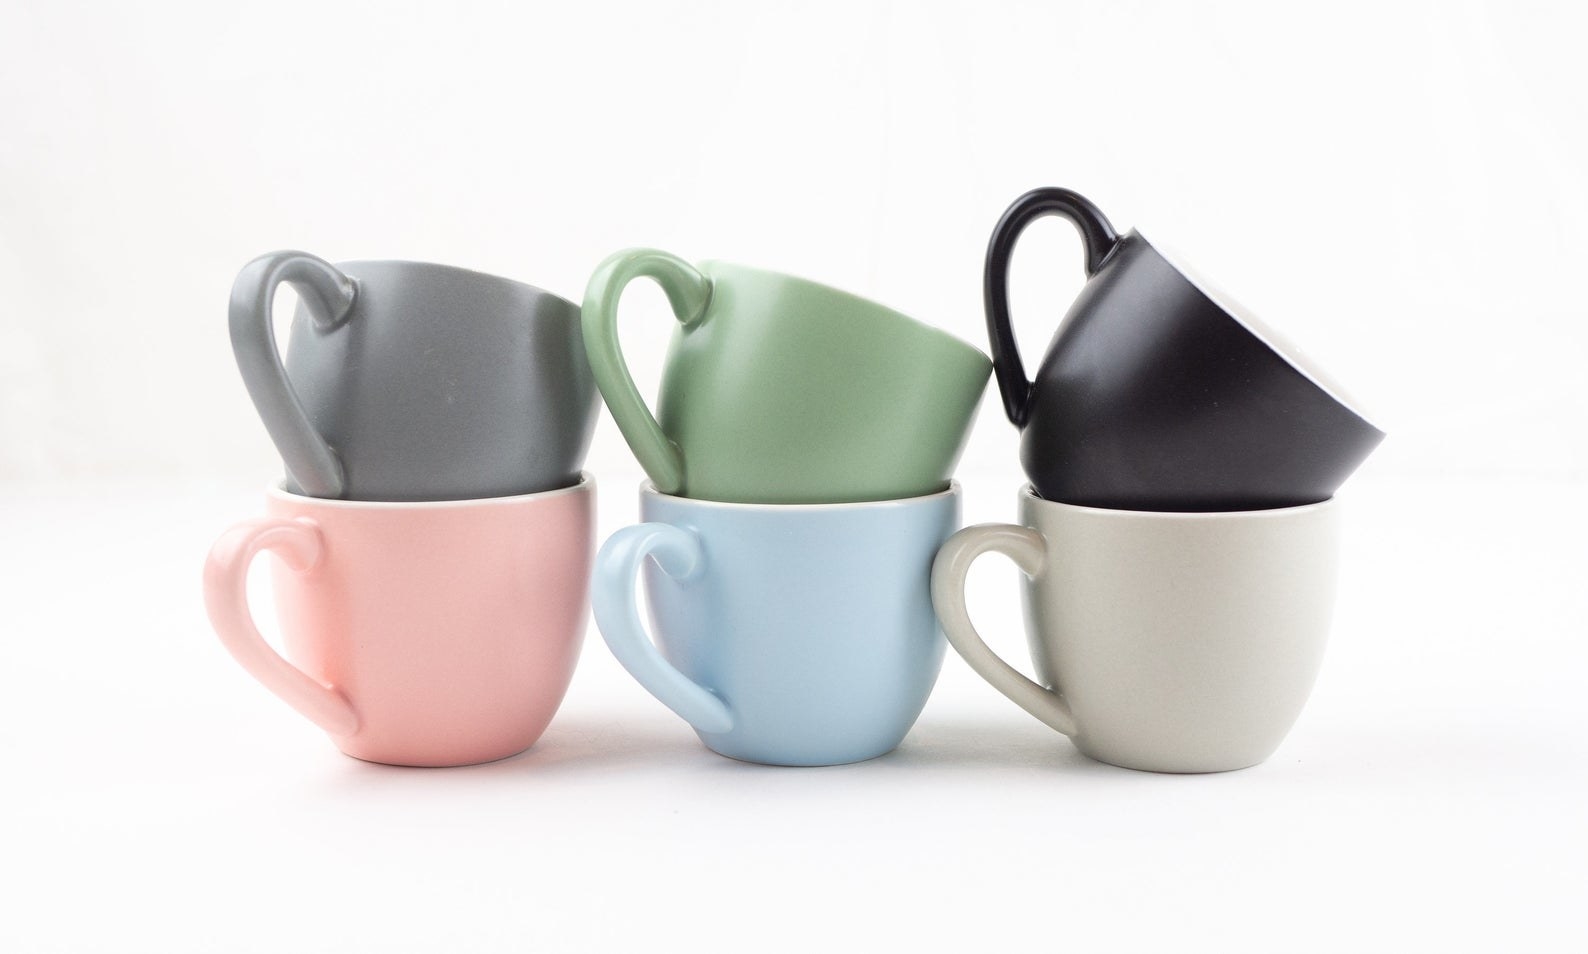 The cups in a variety of colors